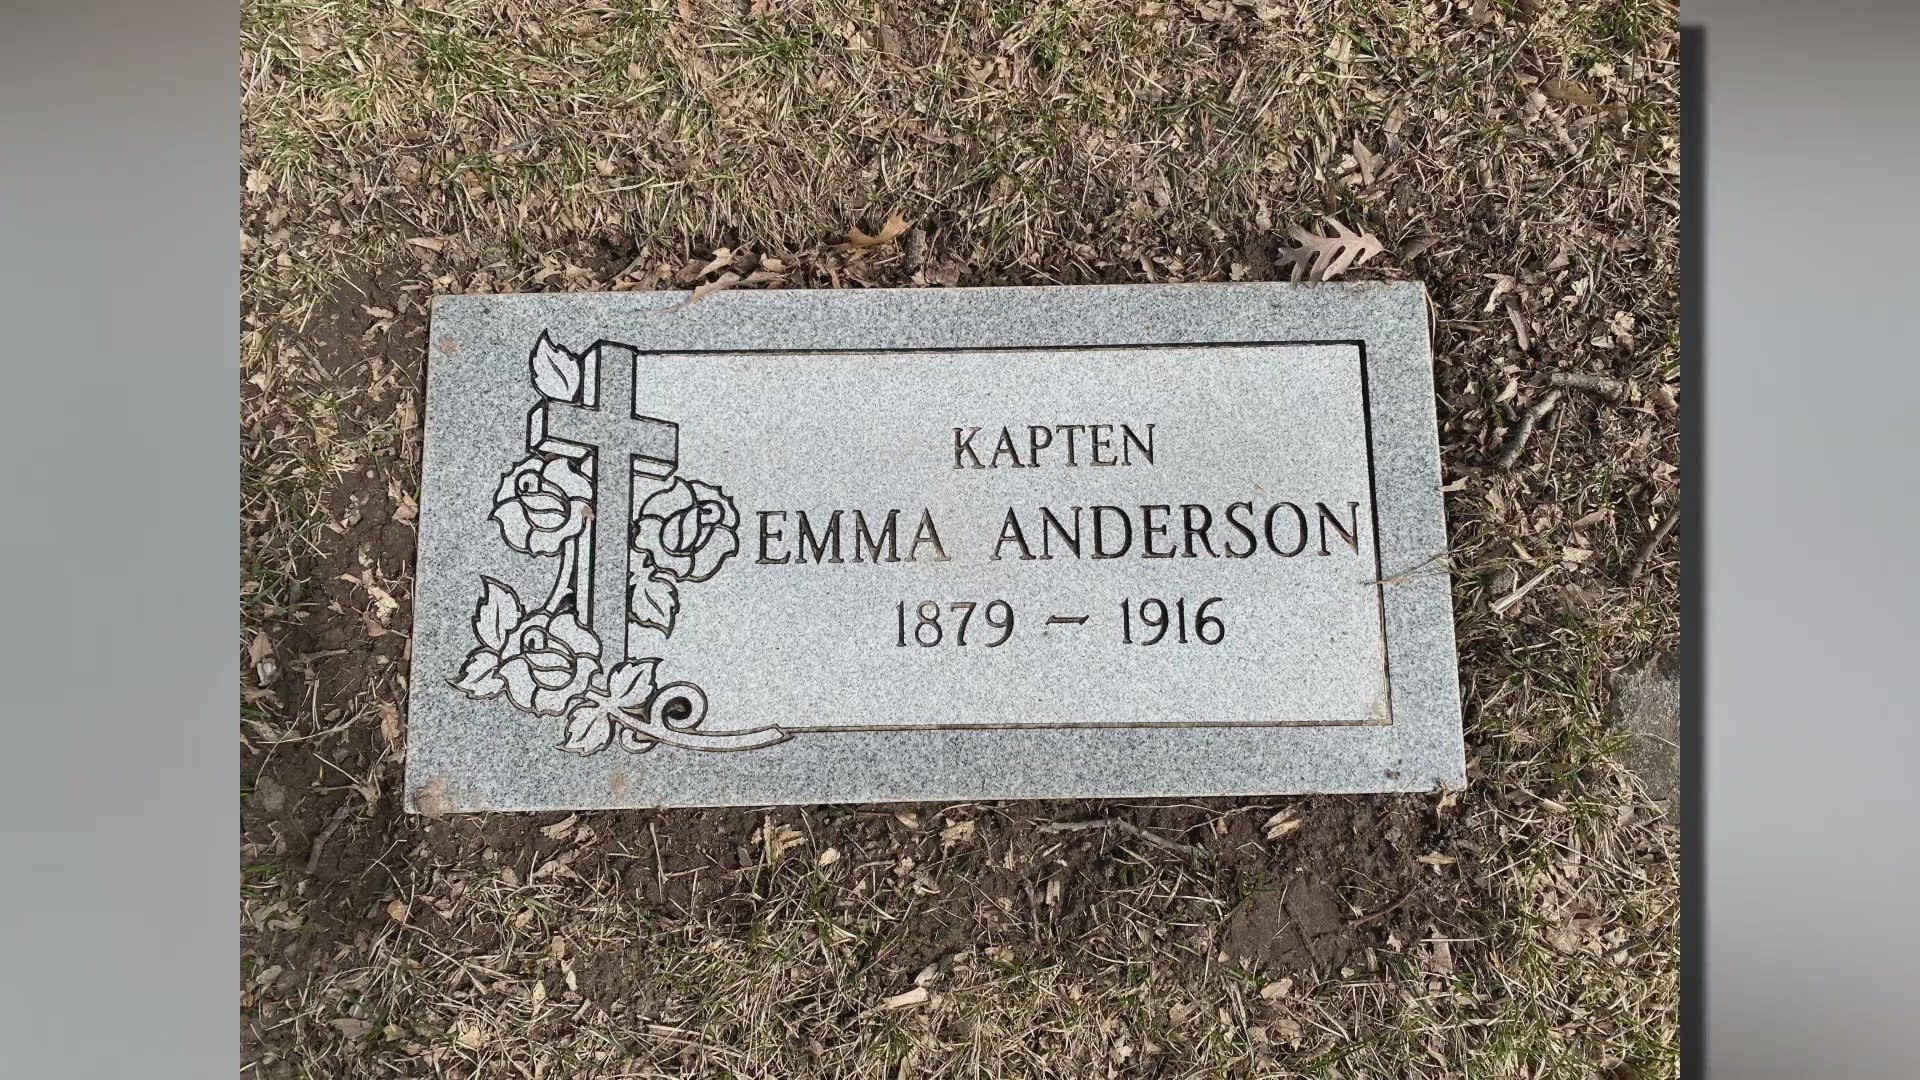 After More Than 100 Years, St. Paul Woman Finally Has Headstone To Mark Her Grave – WCCO